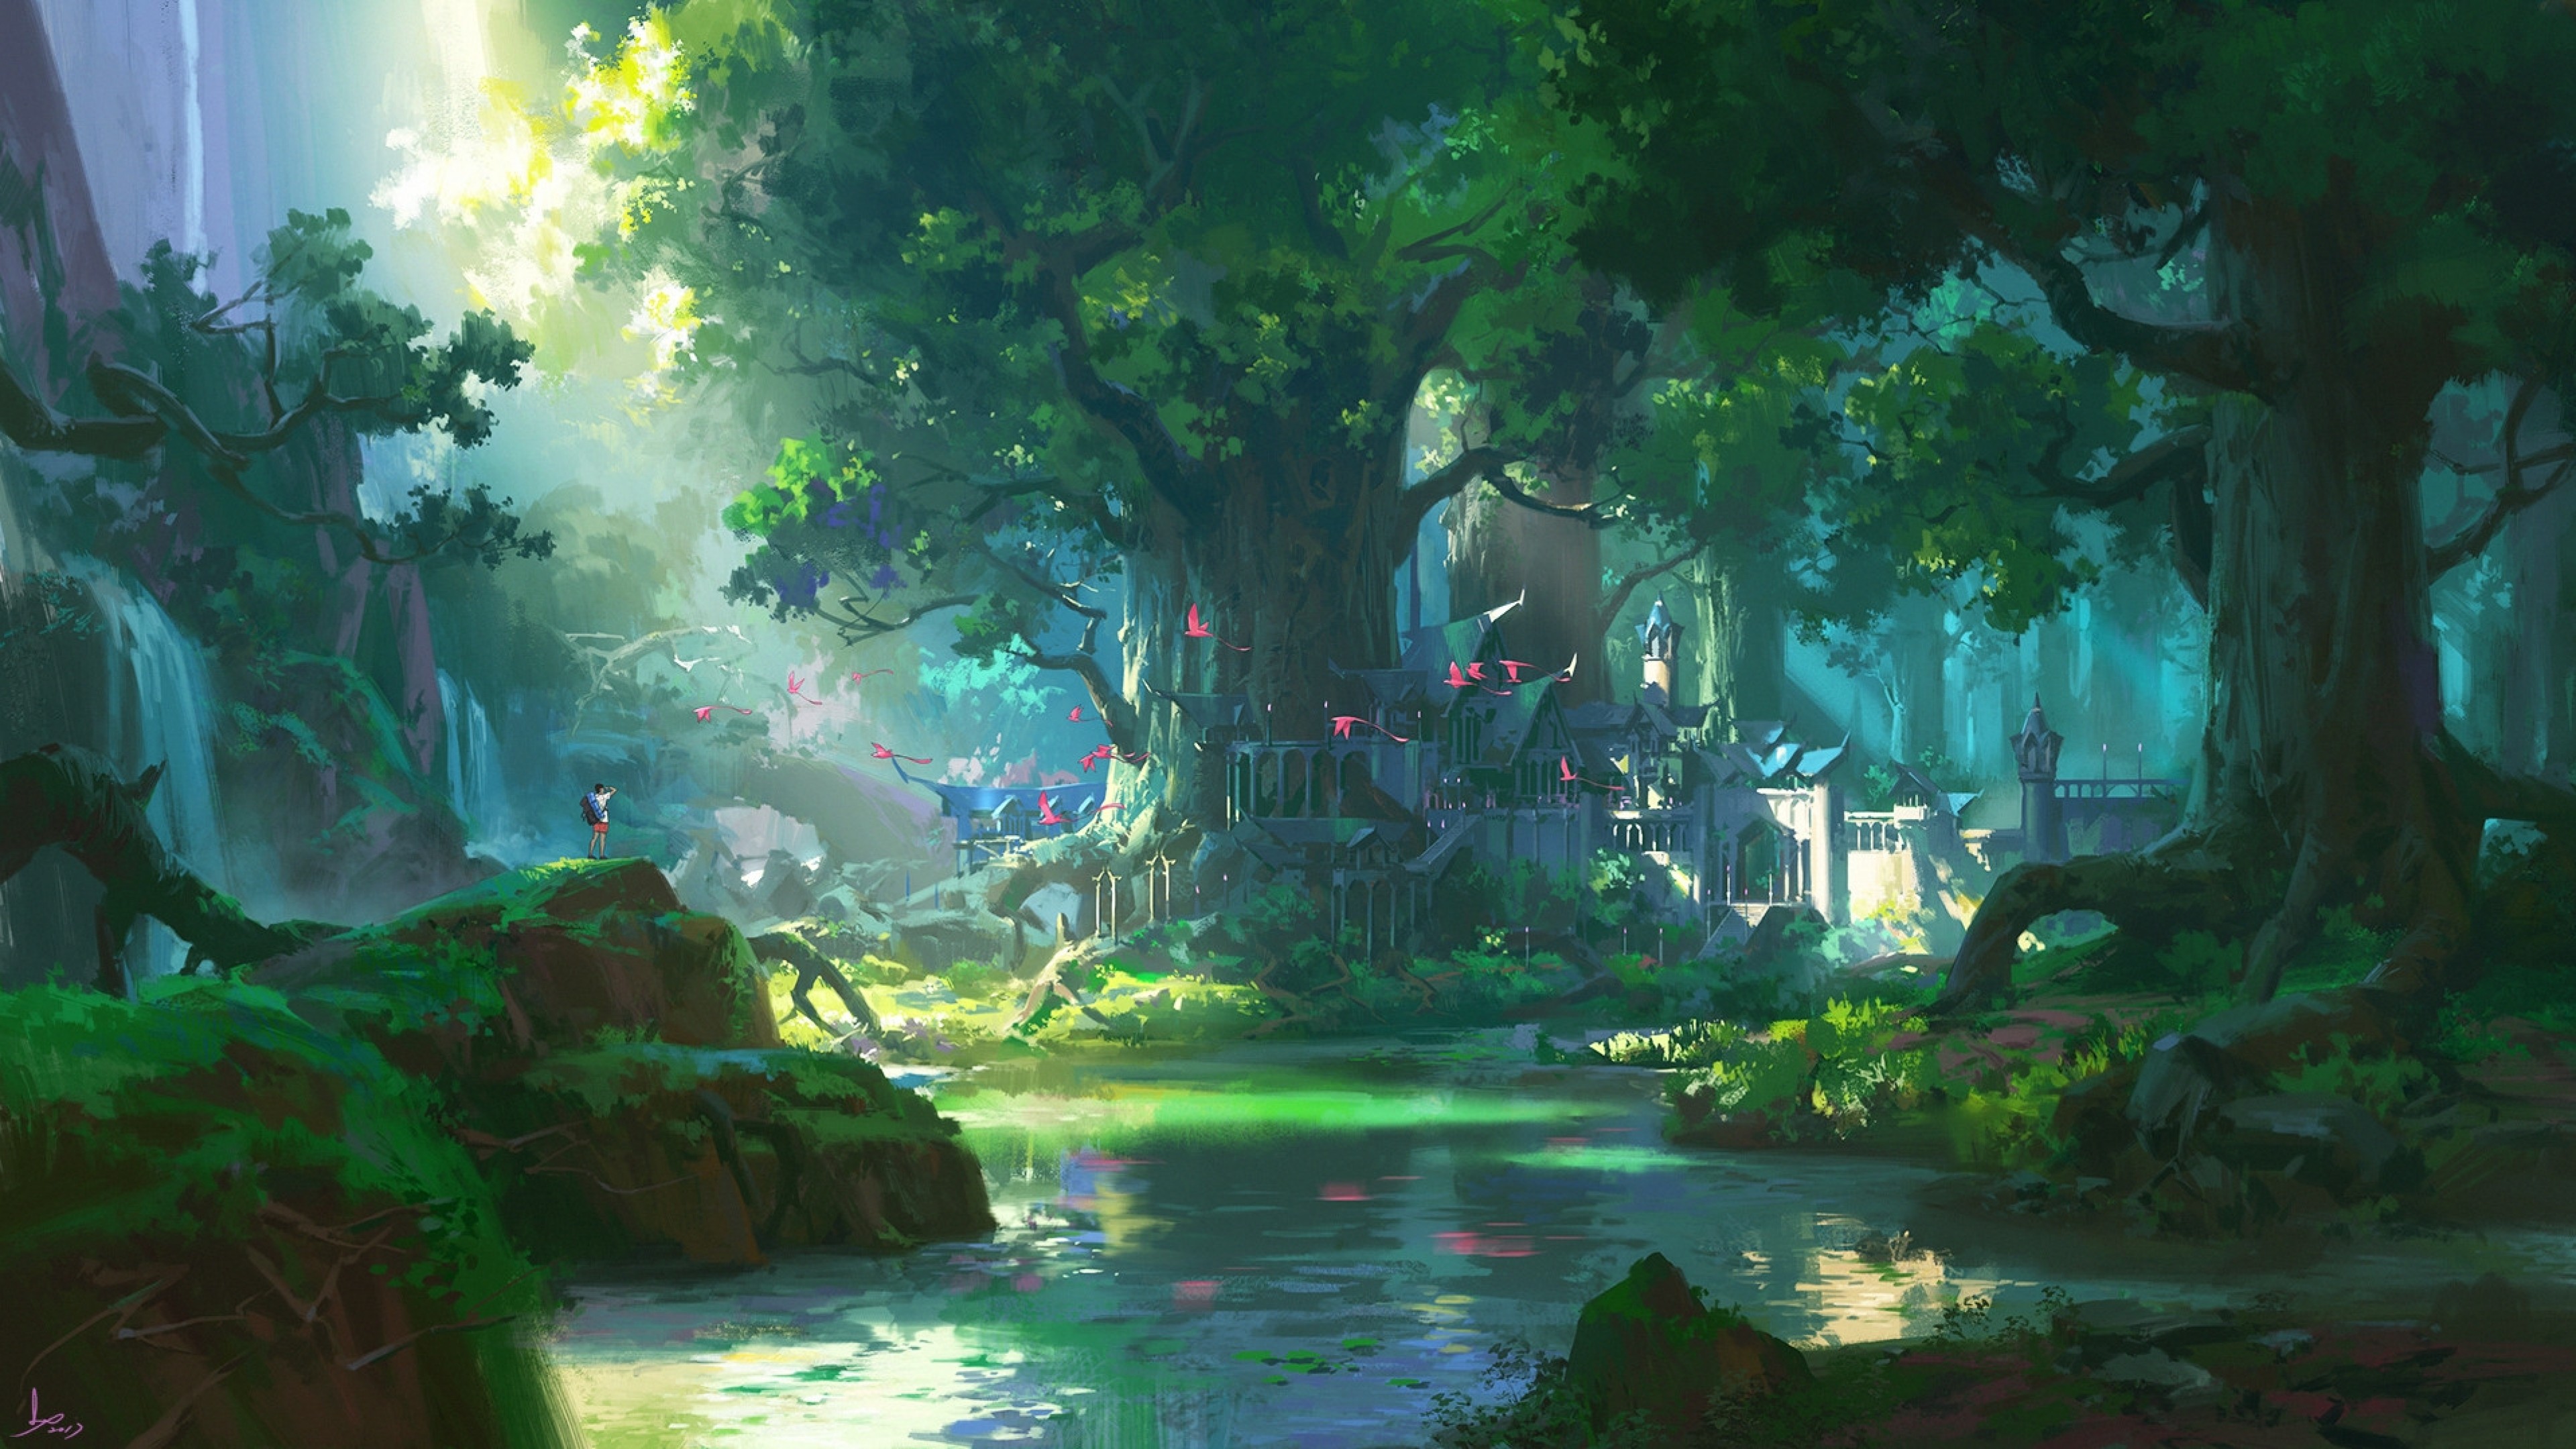 Anime Forest Scenery Wallpaper Js4 Red